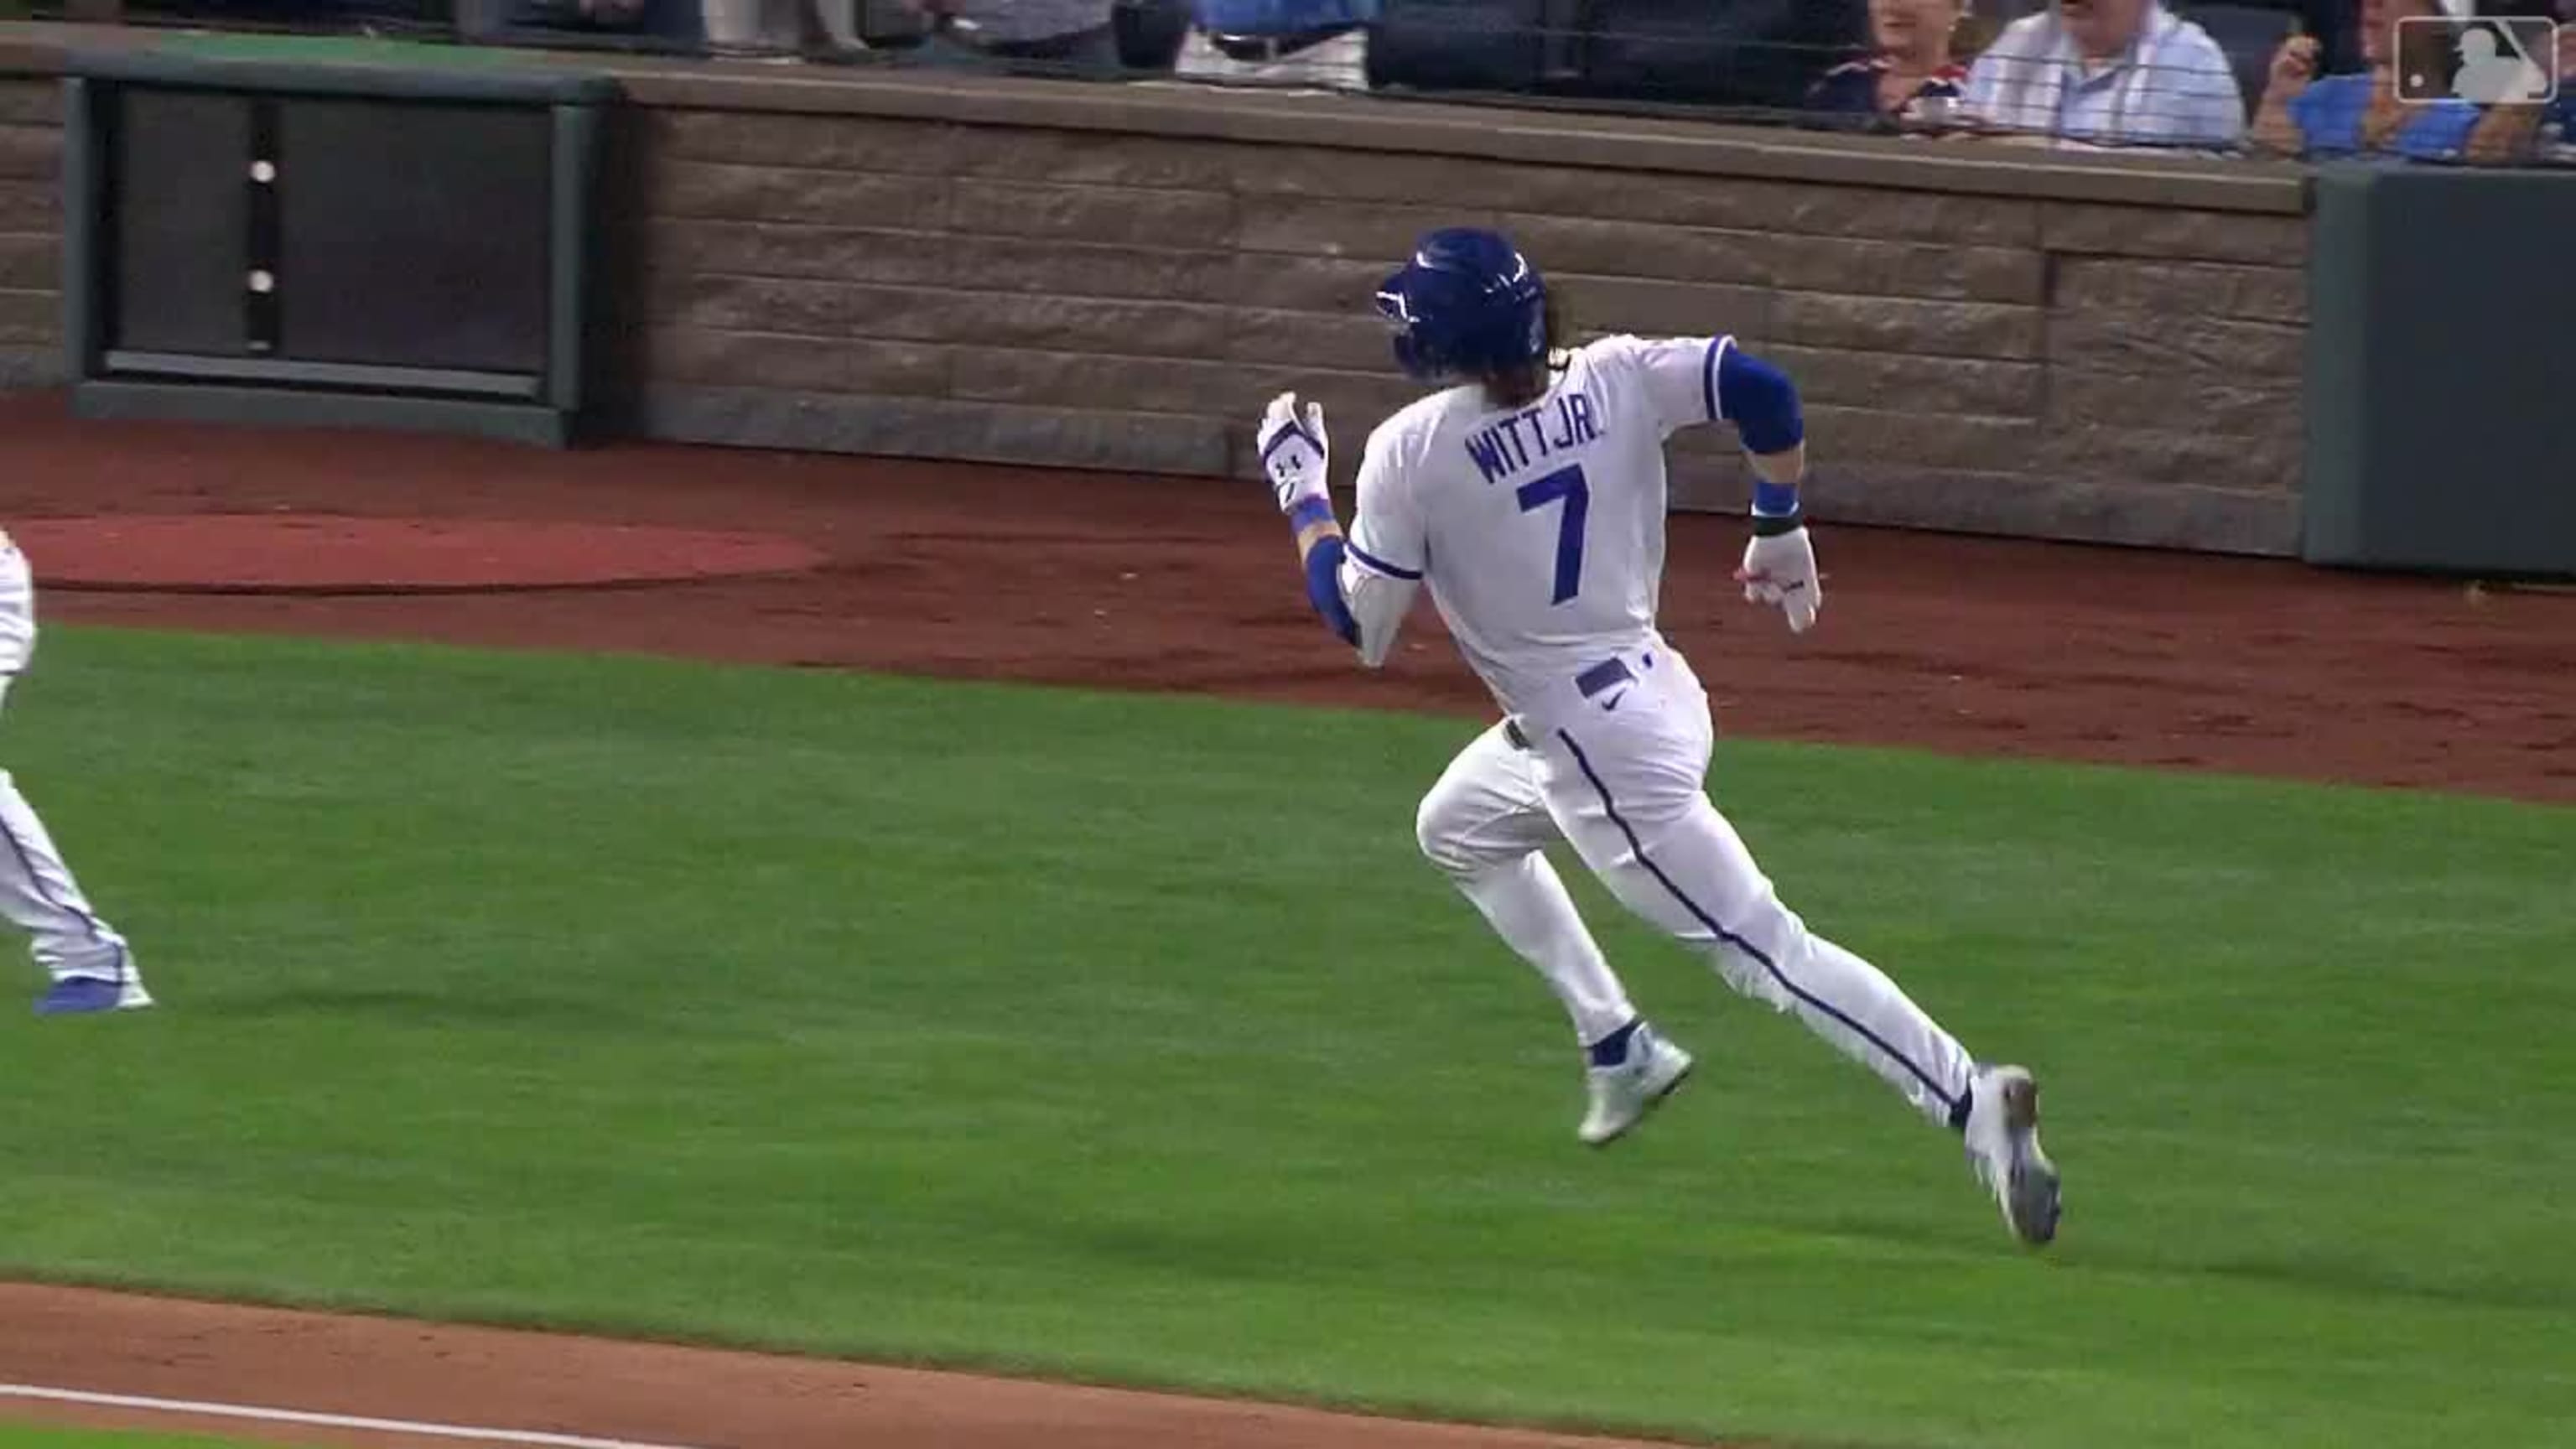 Royals star Witt Jr. flies around the bases for an inside-the-park